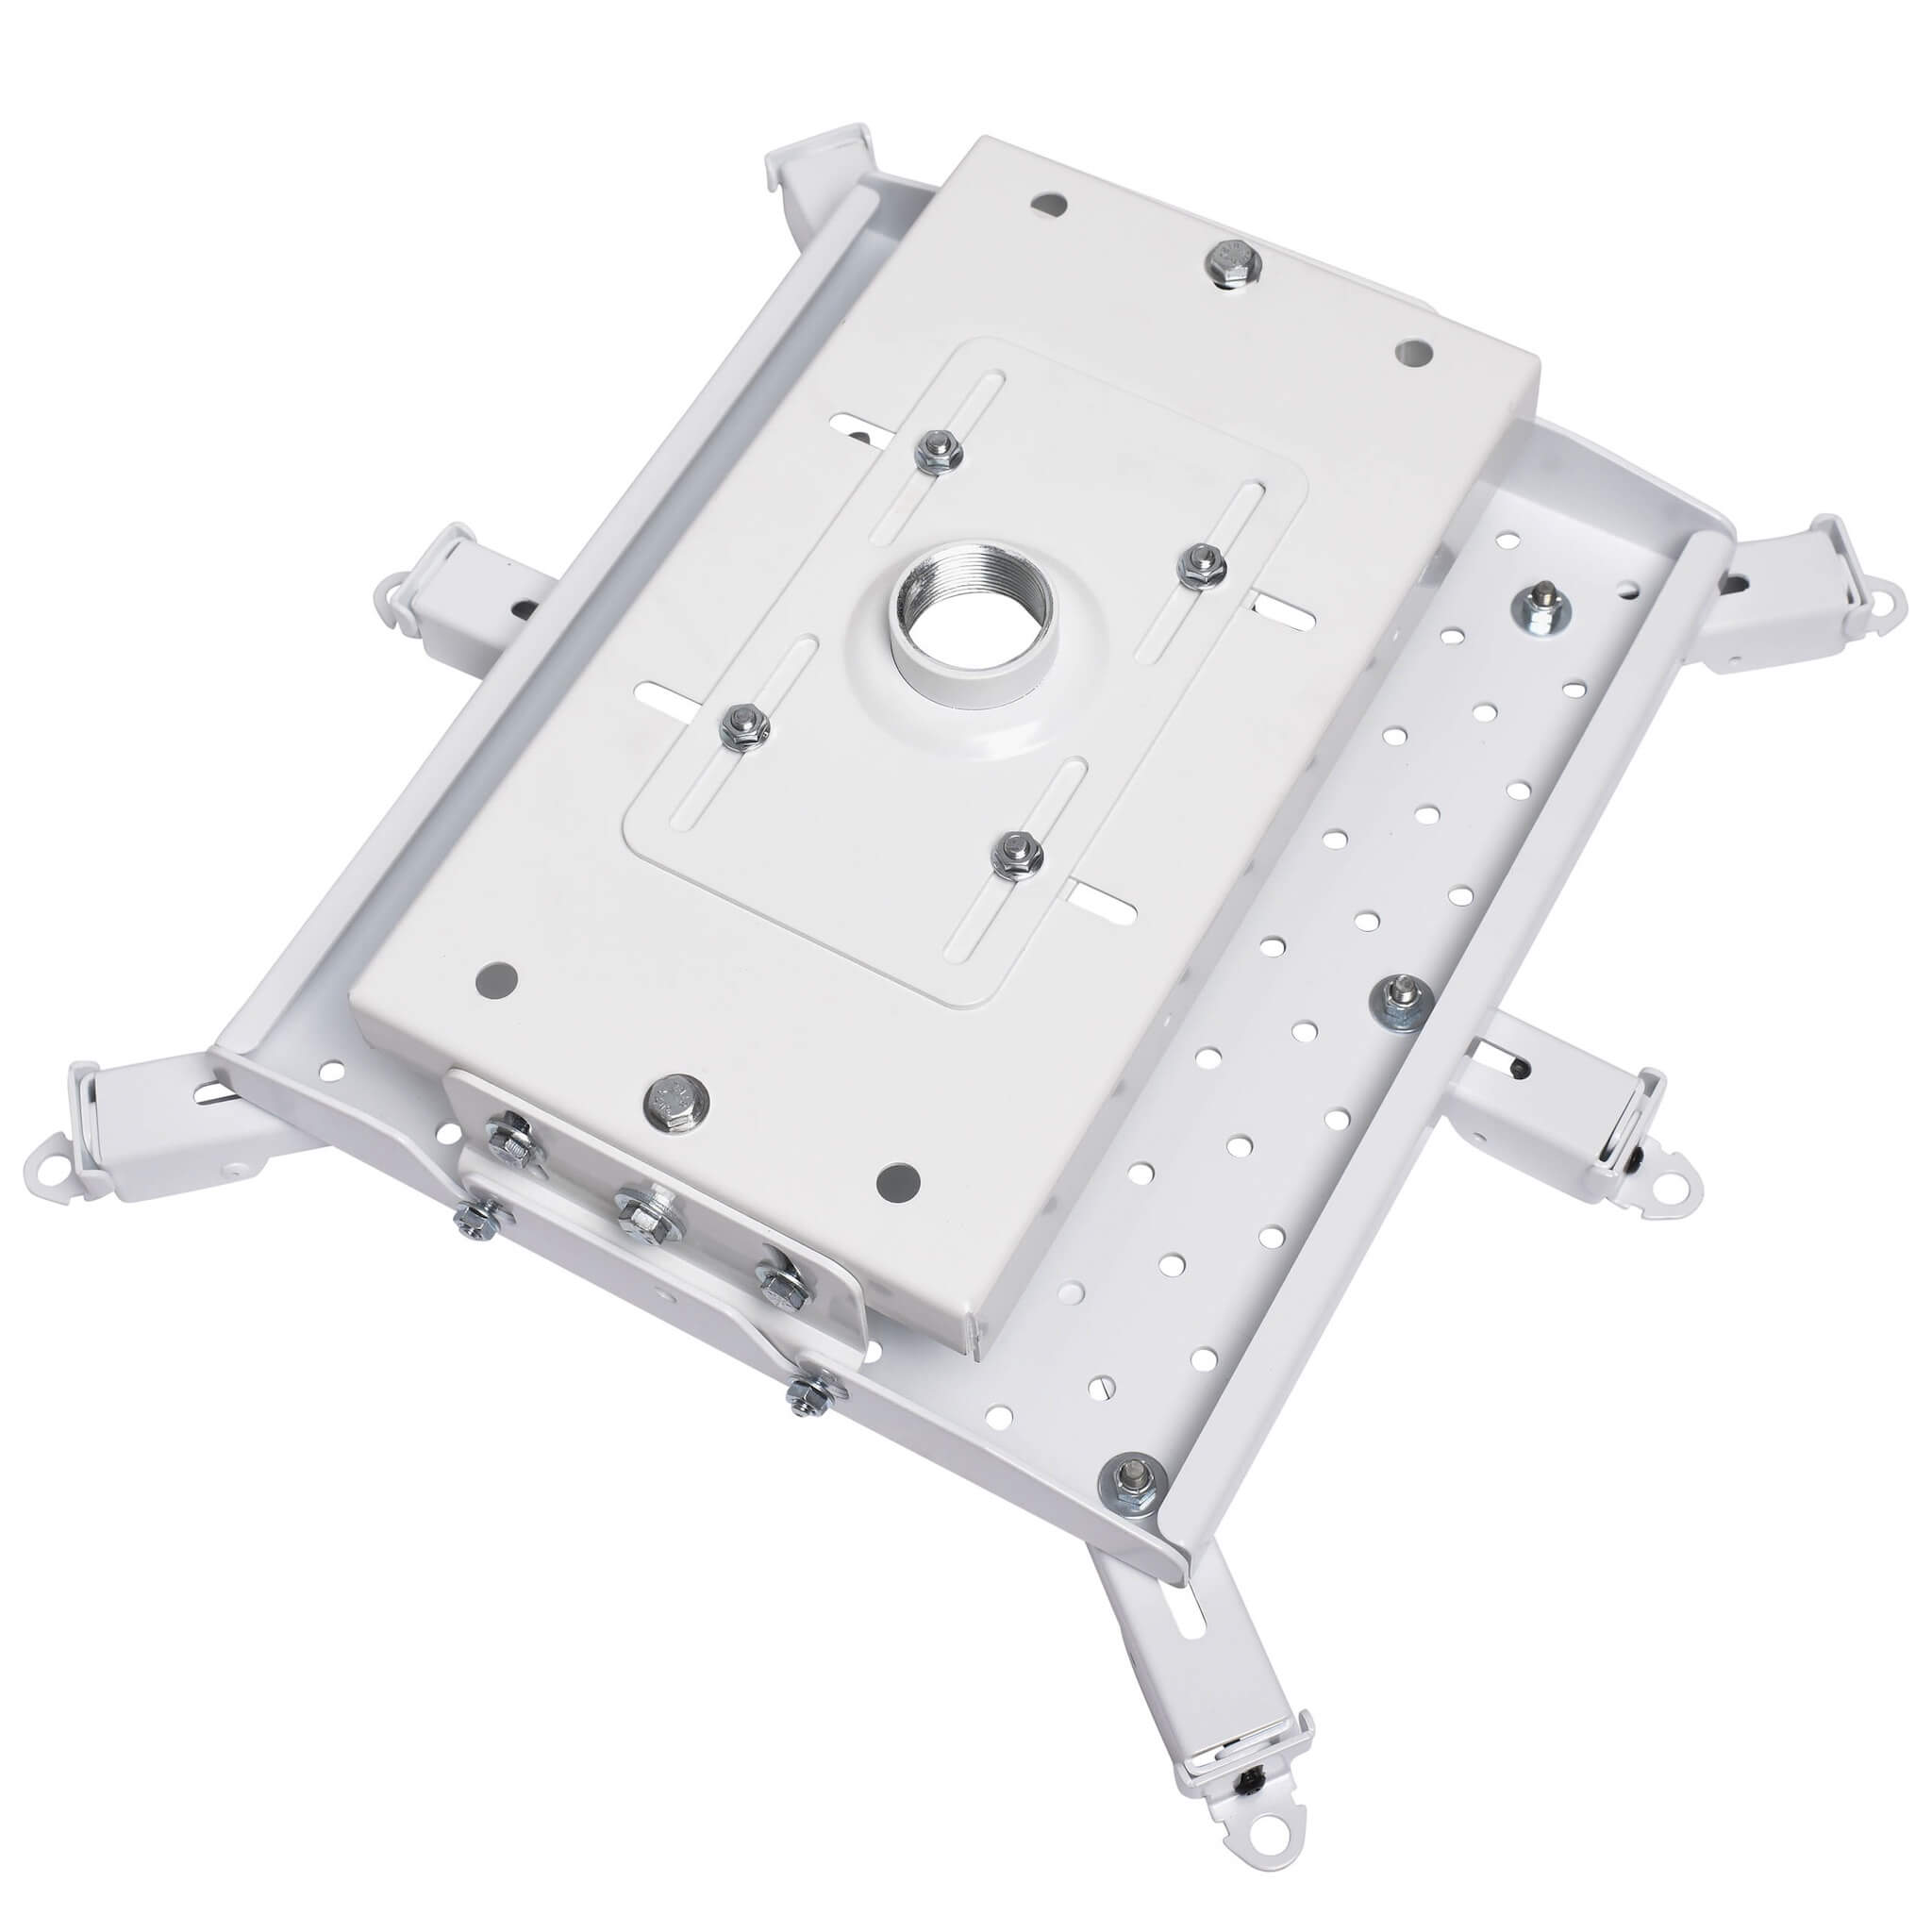 Chief VCMUW - Heavy Duty Universal Projector Mount